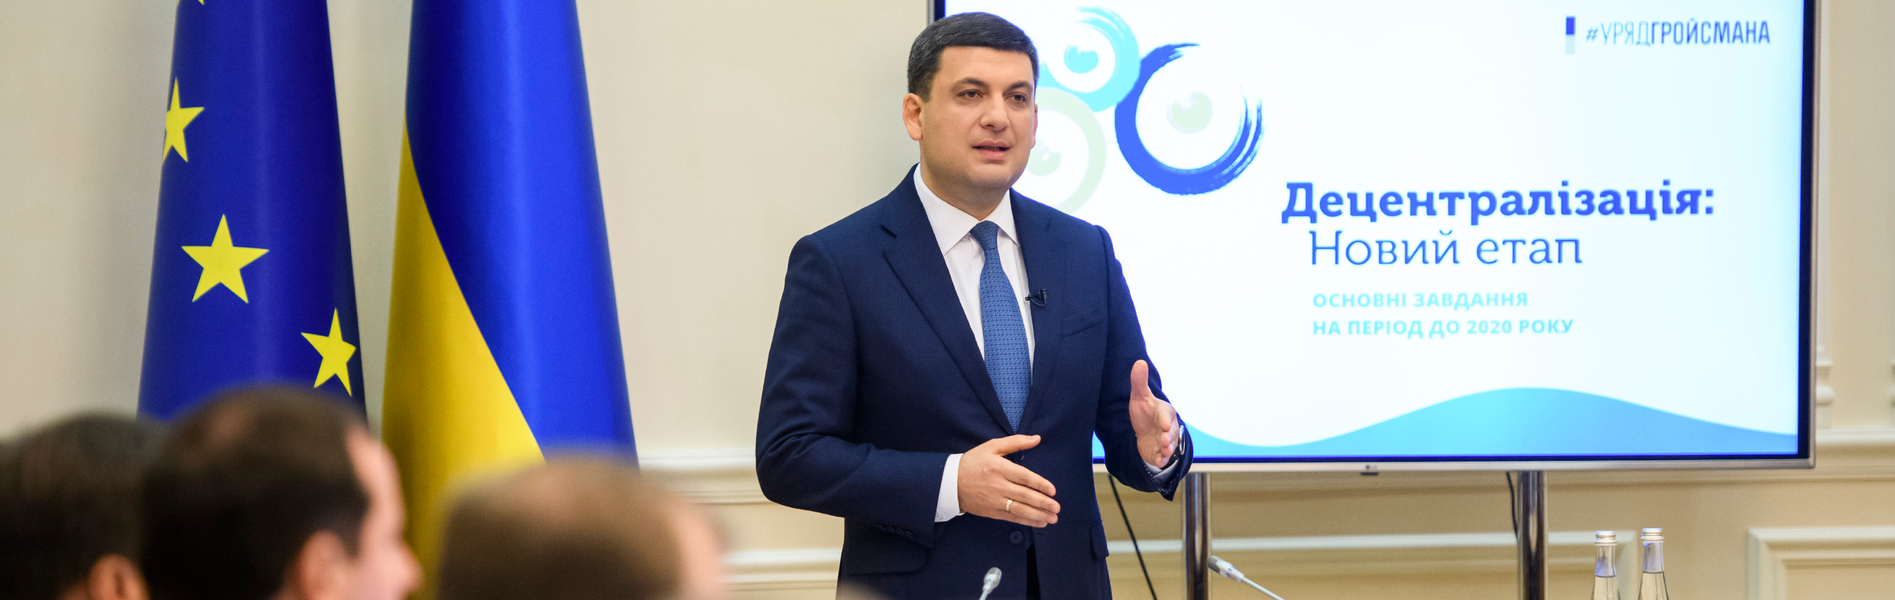 The Government is updating the action plan for decentralisation, initiating a new reform phase, - Volodymyr Groysman